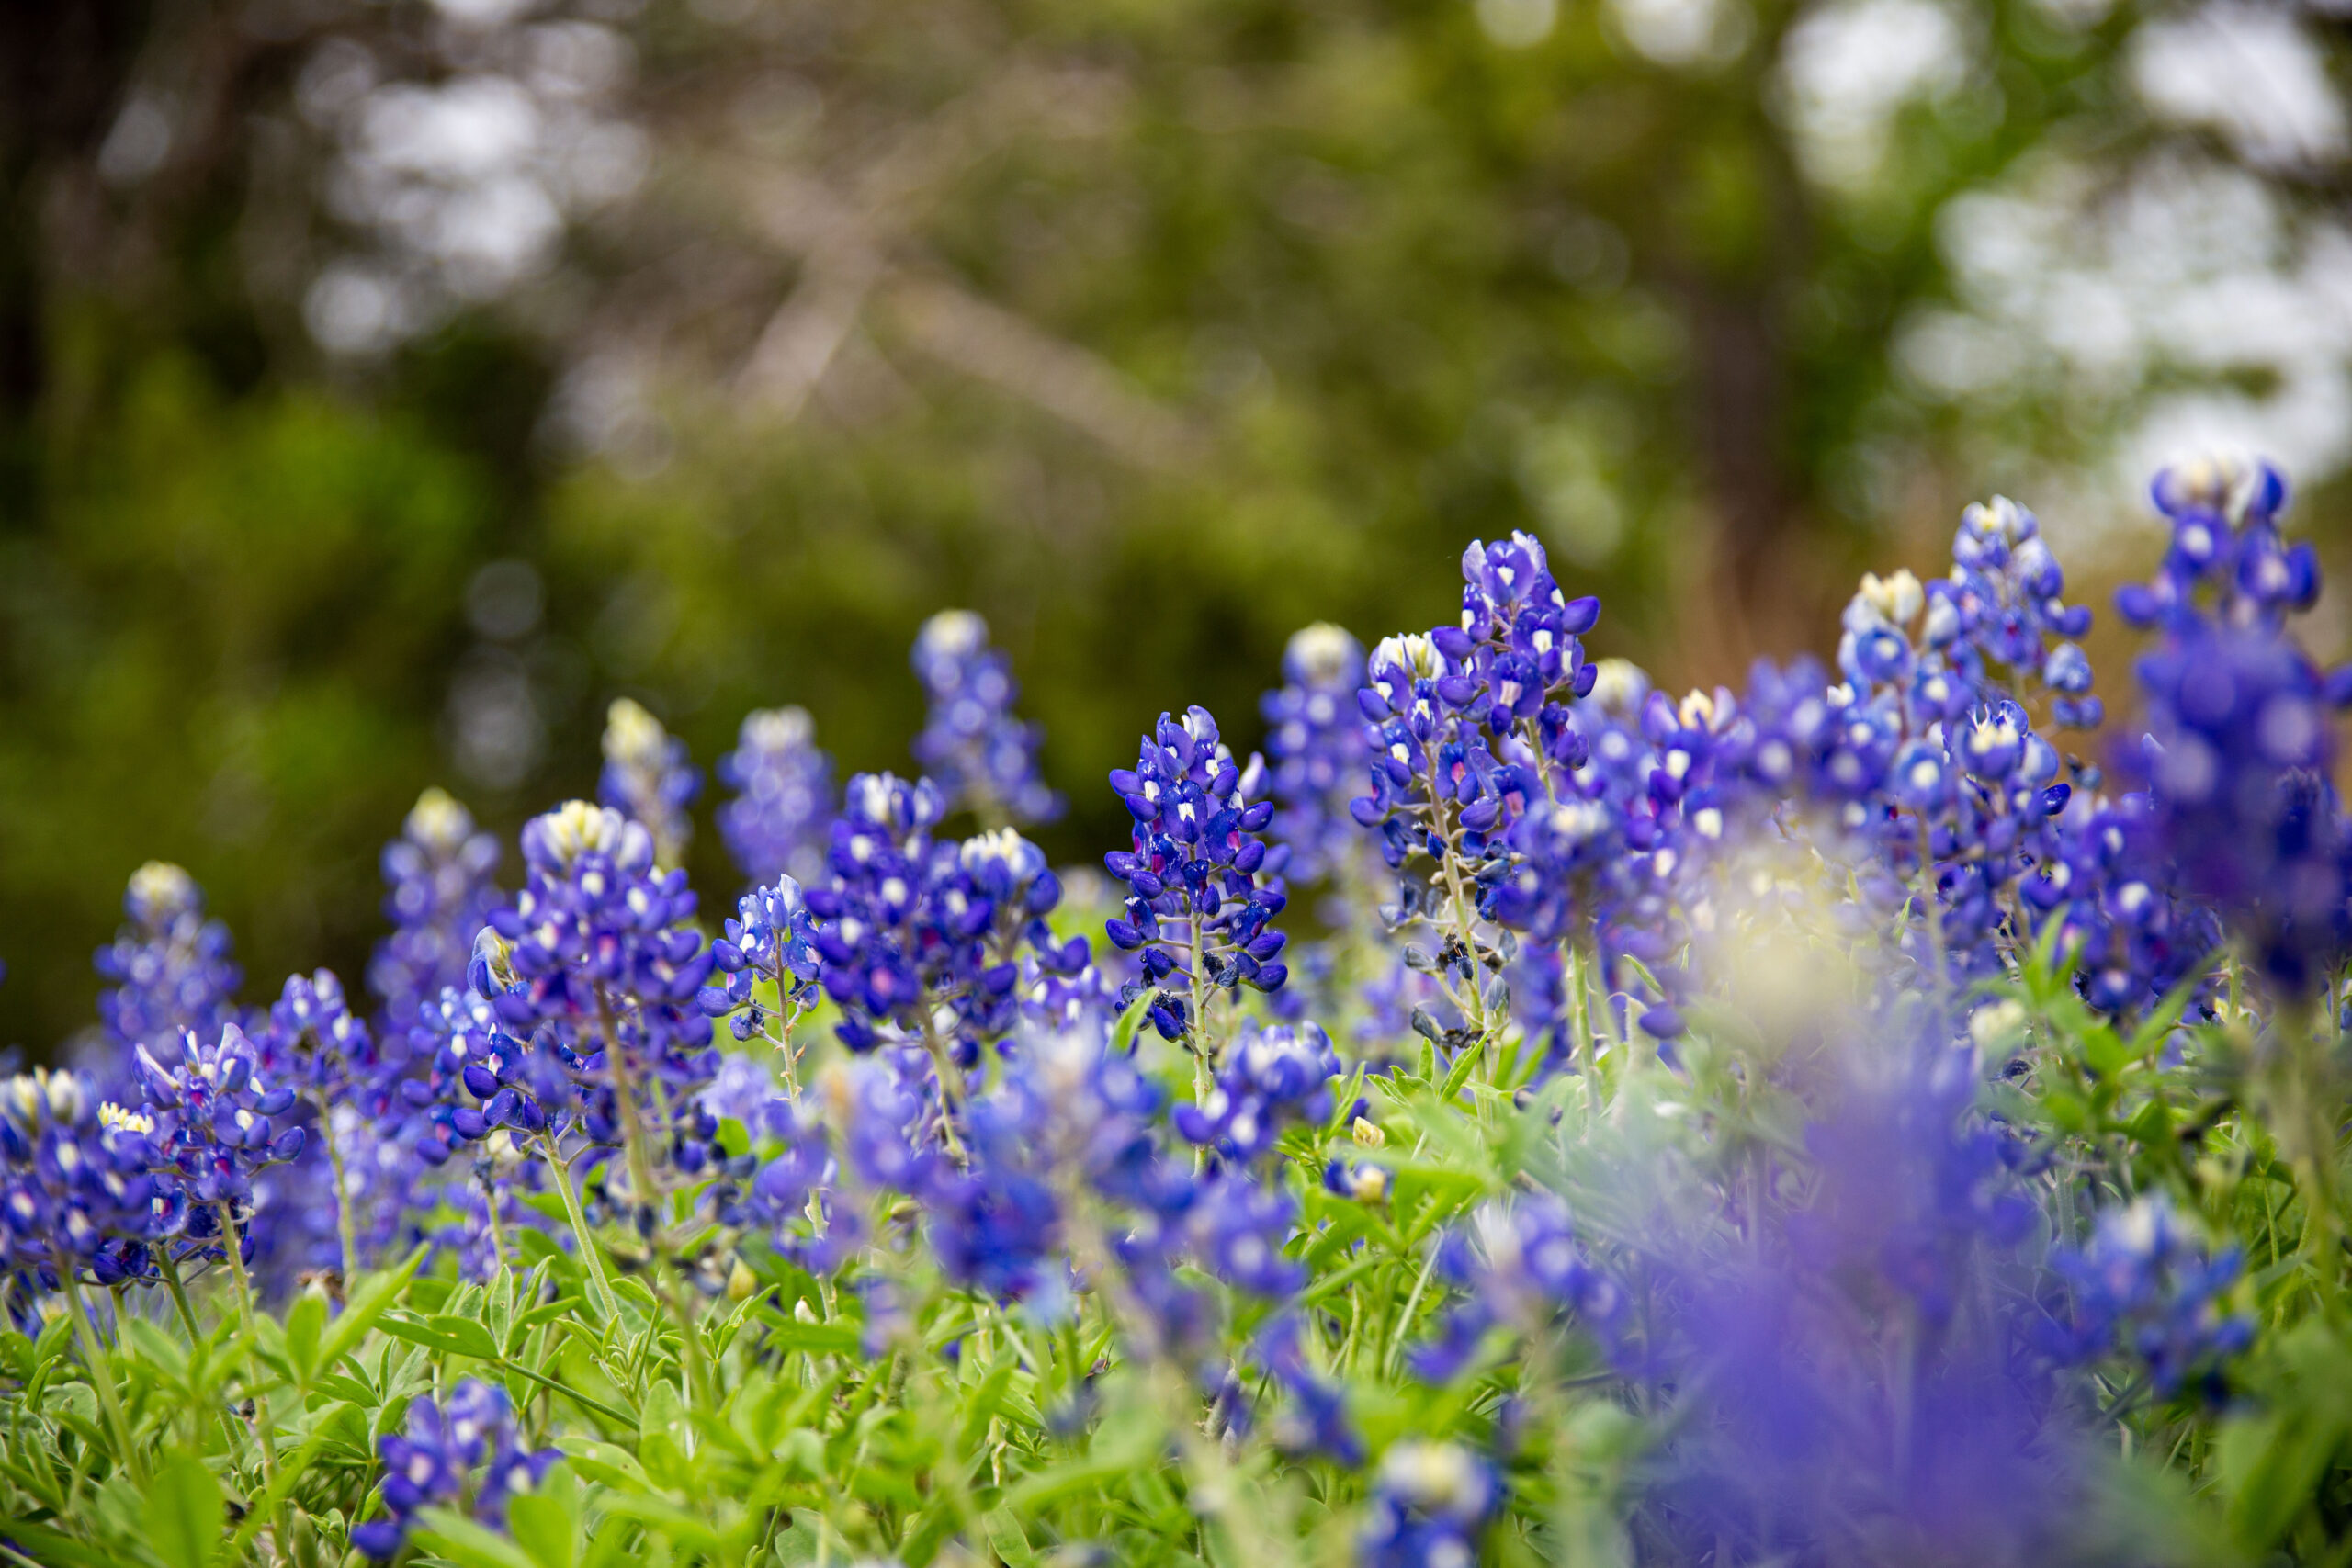 A cluster of bluebonnets